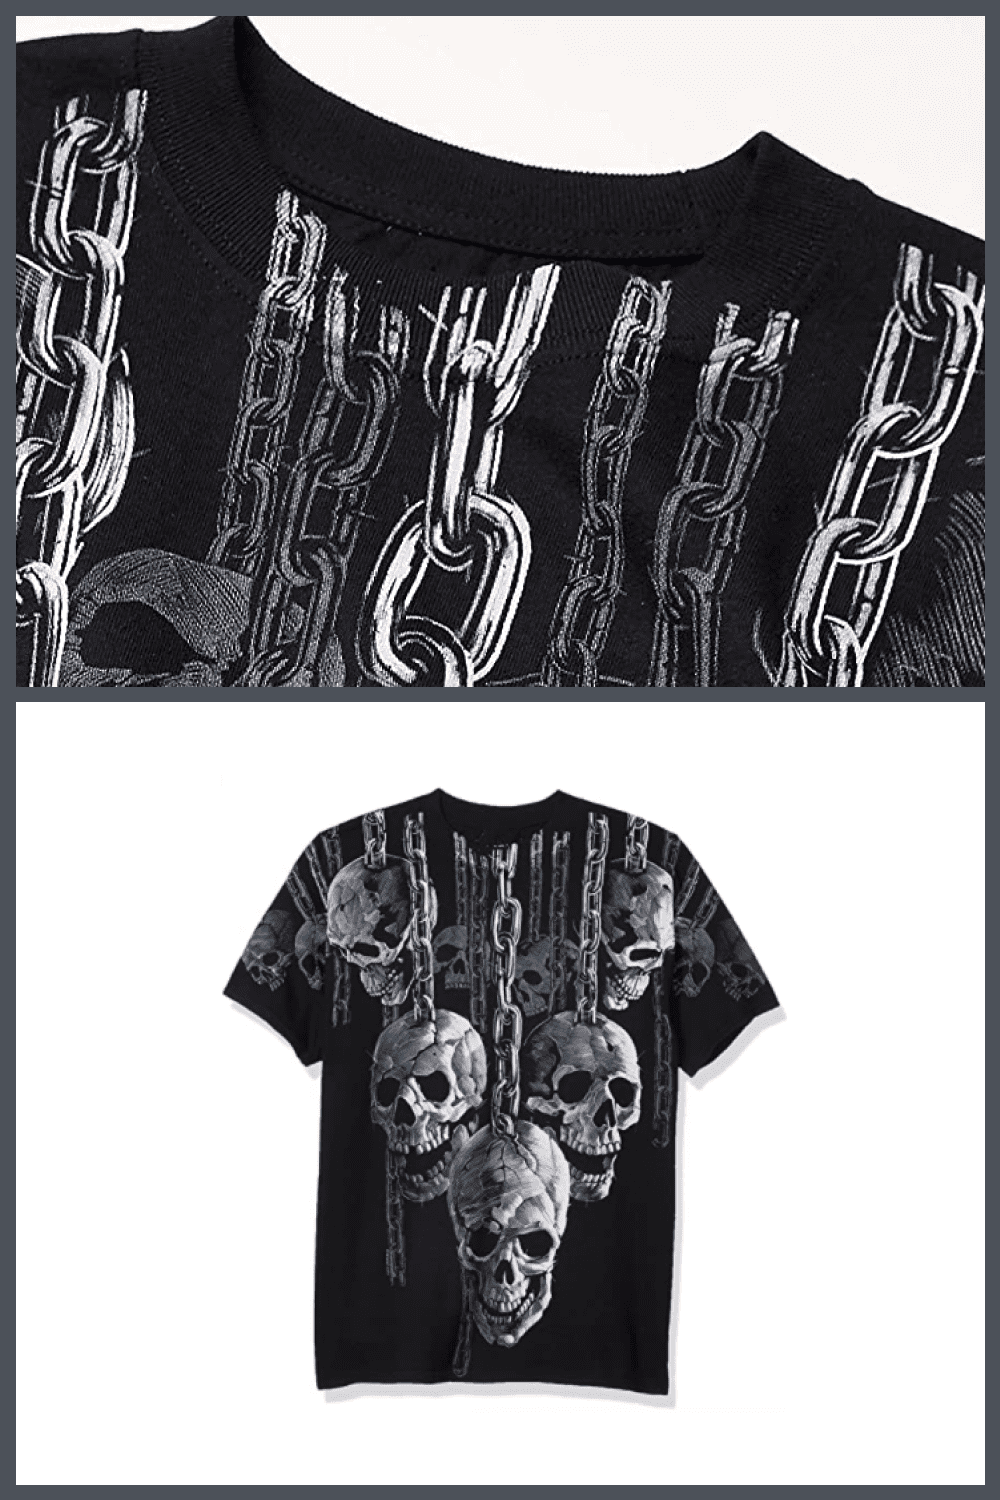 Embossed black T-shirt with skulls depicted.